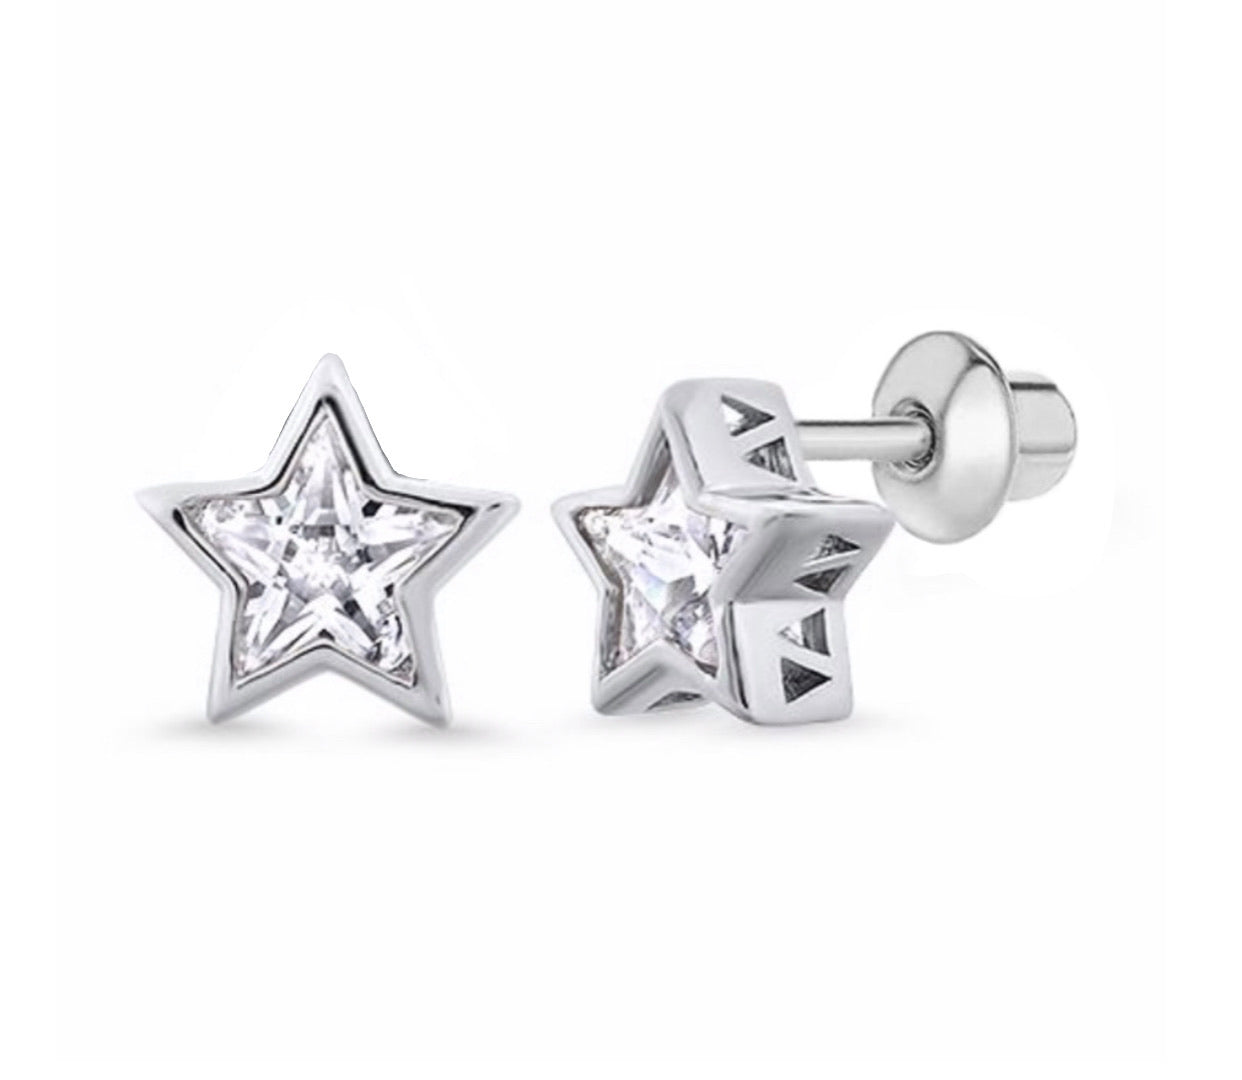 925 Sterling Silver Star CZ Stone Screw Back Earrings For Baby, Toddler, Kids, Teens